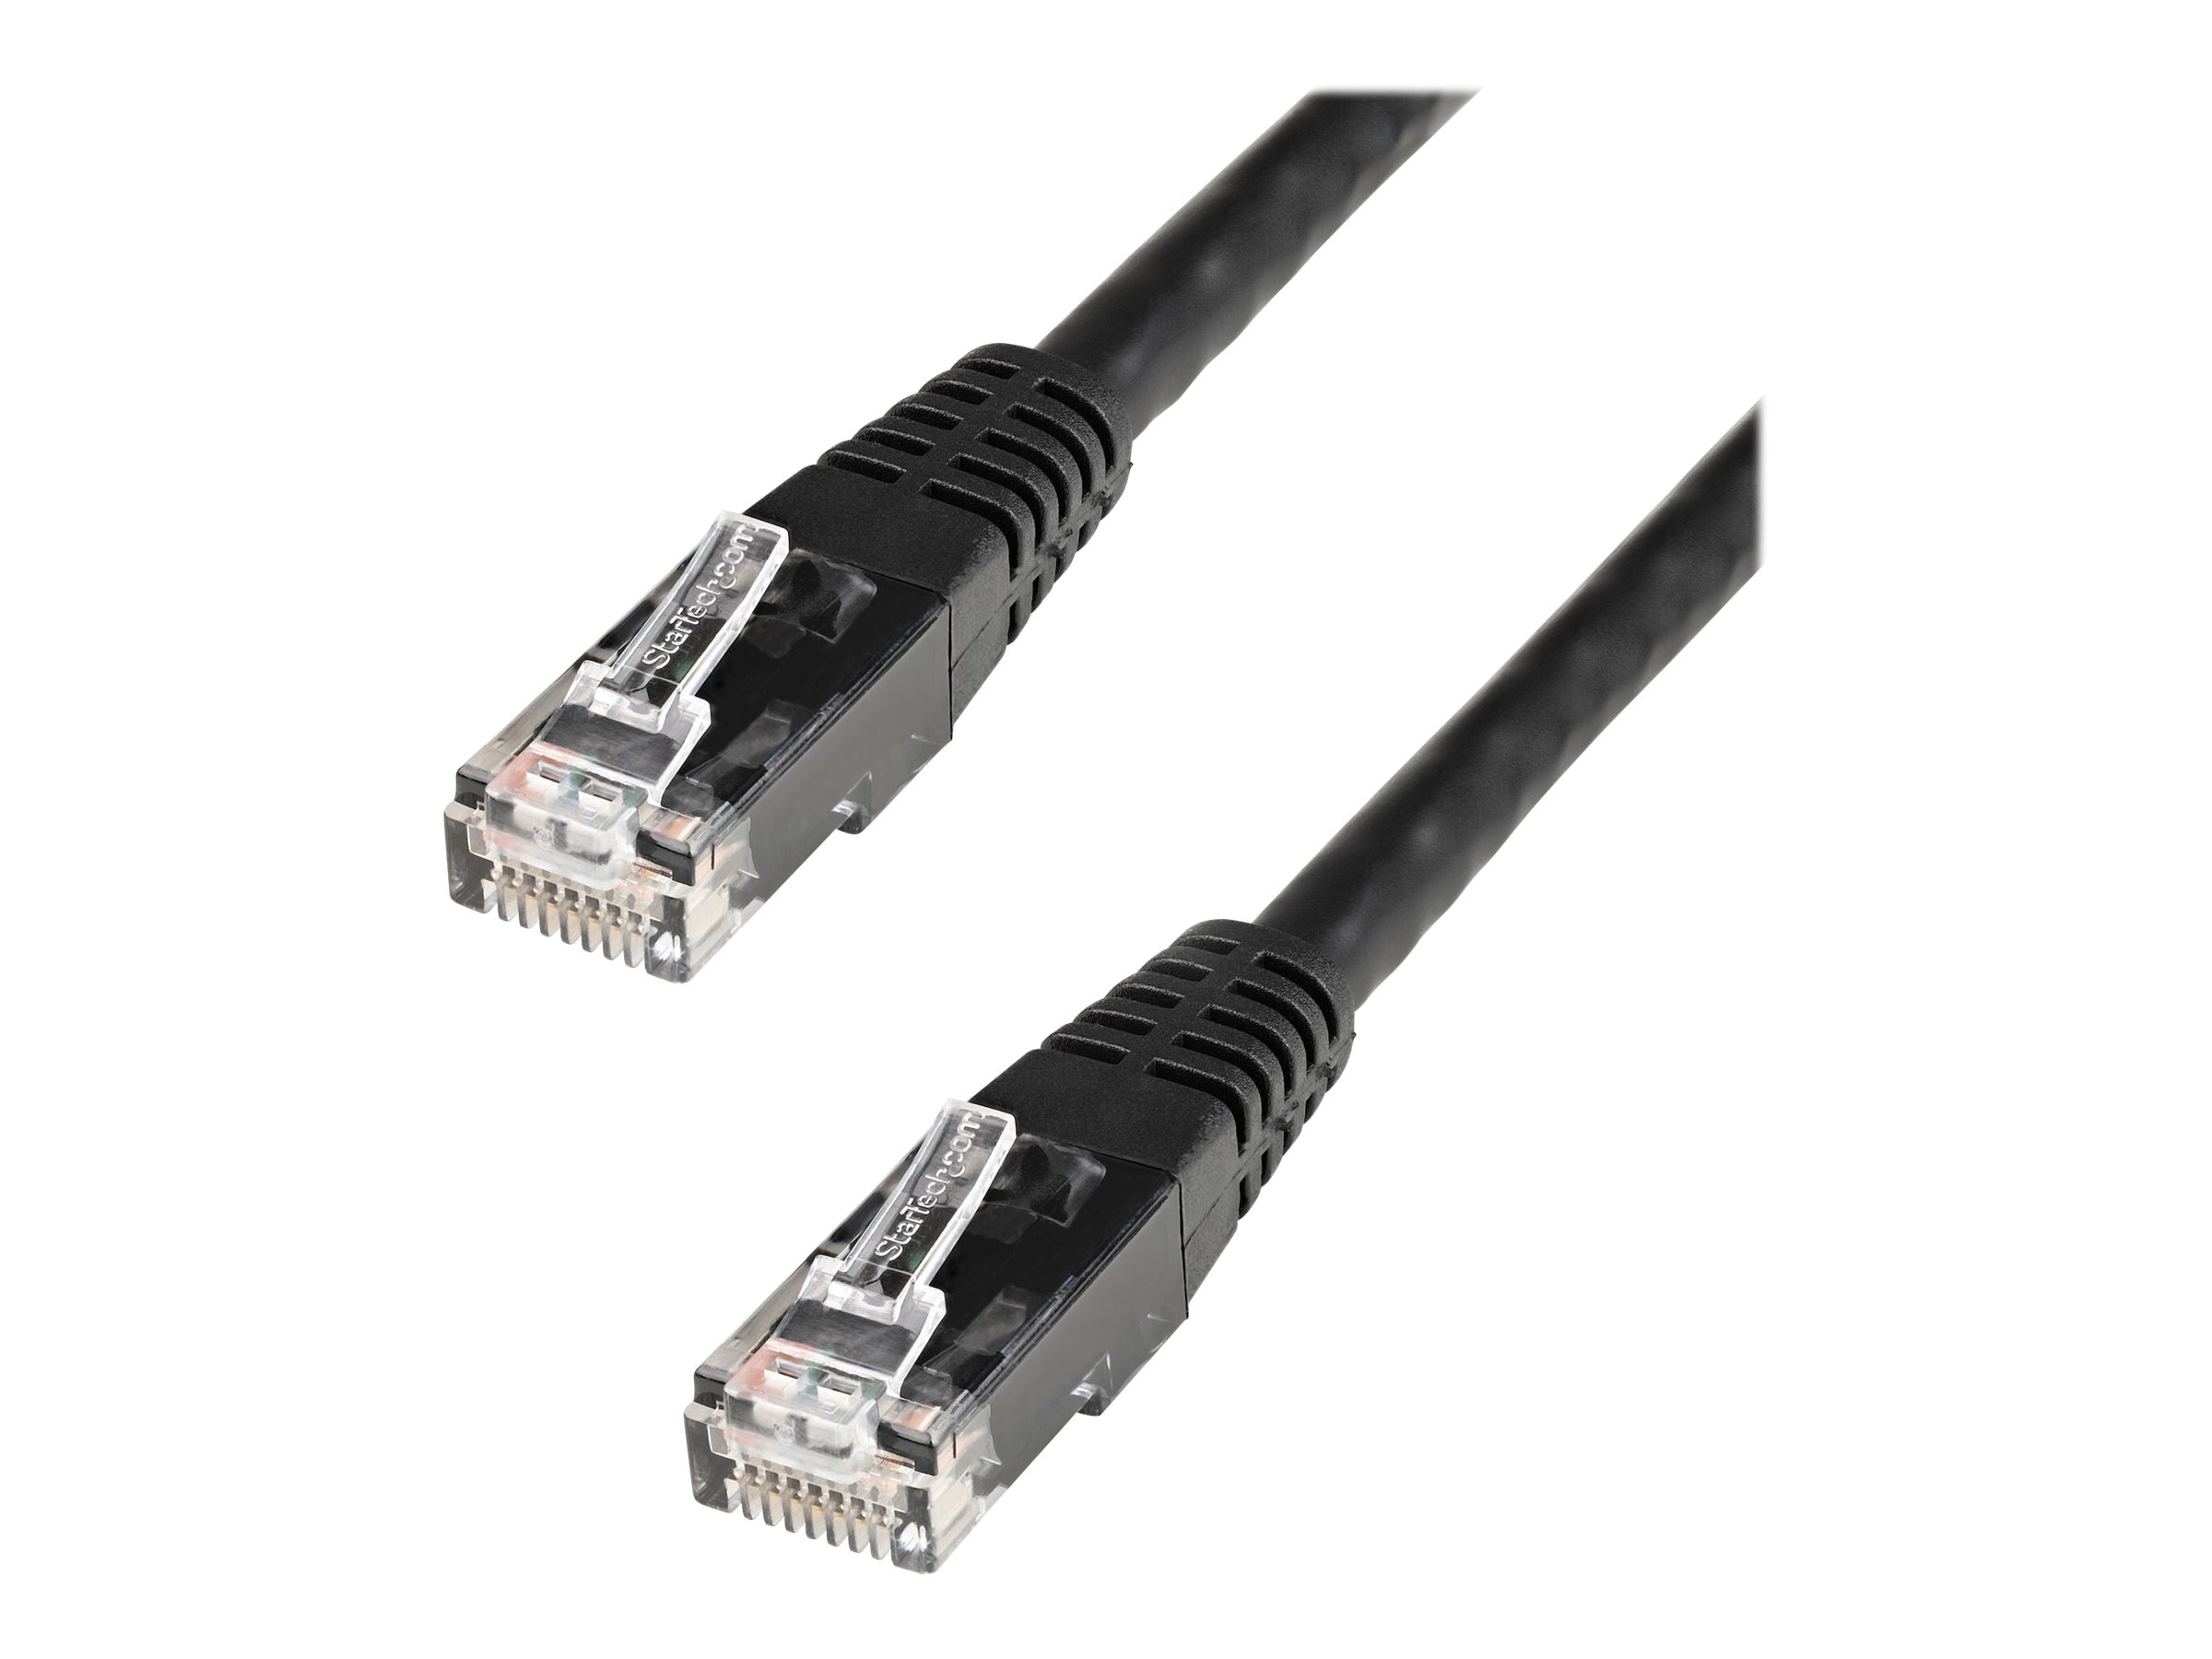 StarTech.com 1ft CAT6 Ethernet Cable, 10 Gigabit Molded RJ45 650MHz 100W PoE Patch Cord, CAT 6 10GbE UTP Network Cable with Strain Relief, Black, Fluke Tested/Wiring is UL Certified/TIA